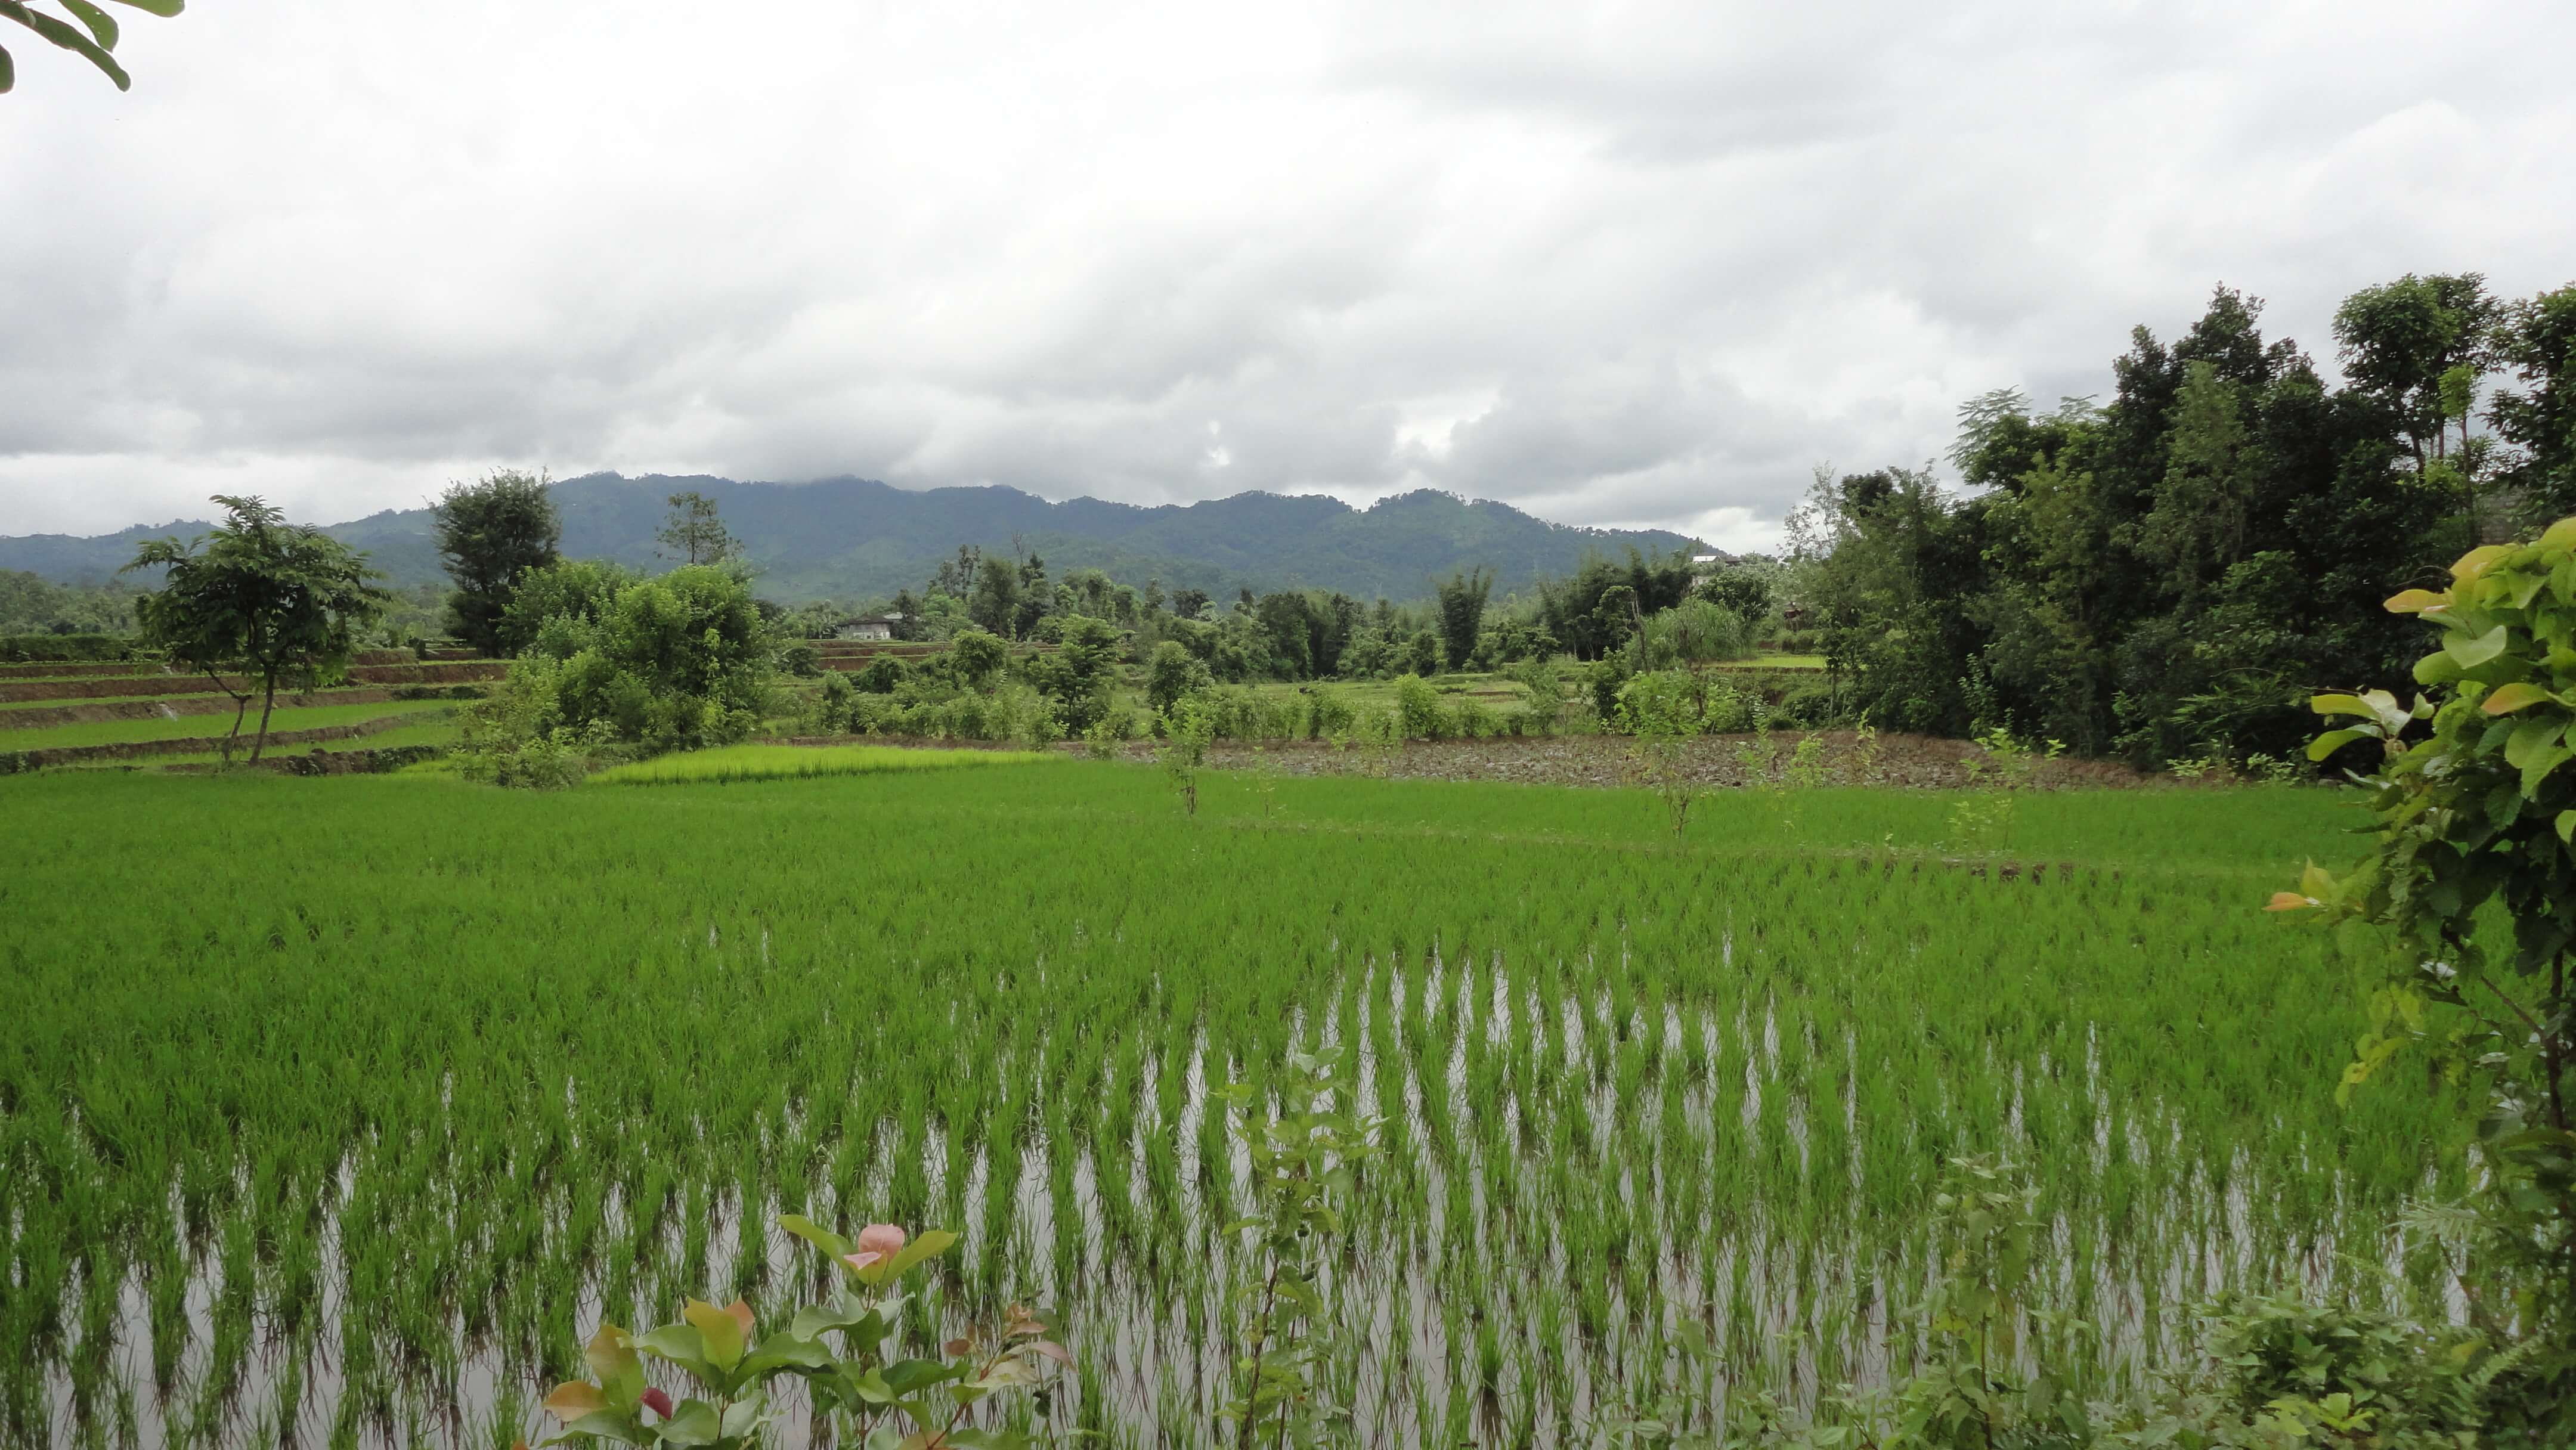 Agriculture and forest based livelihood